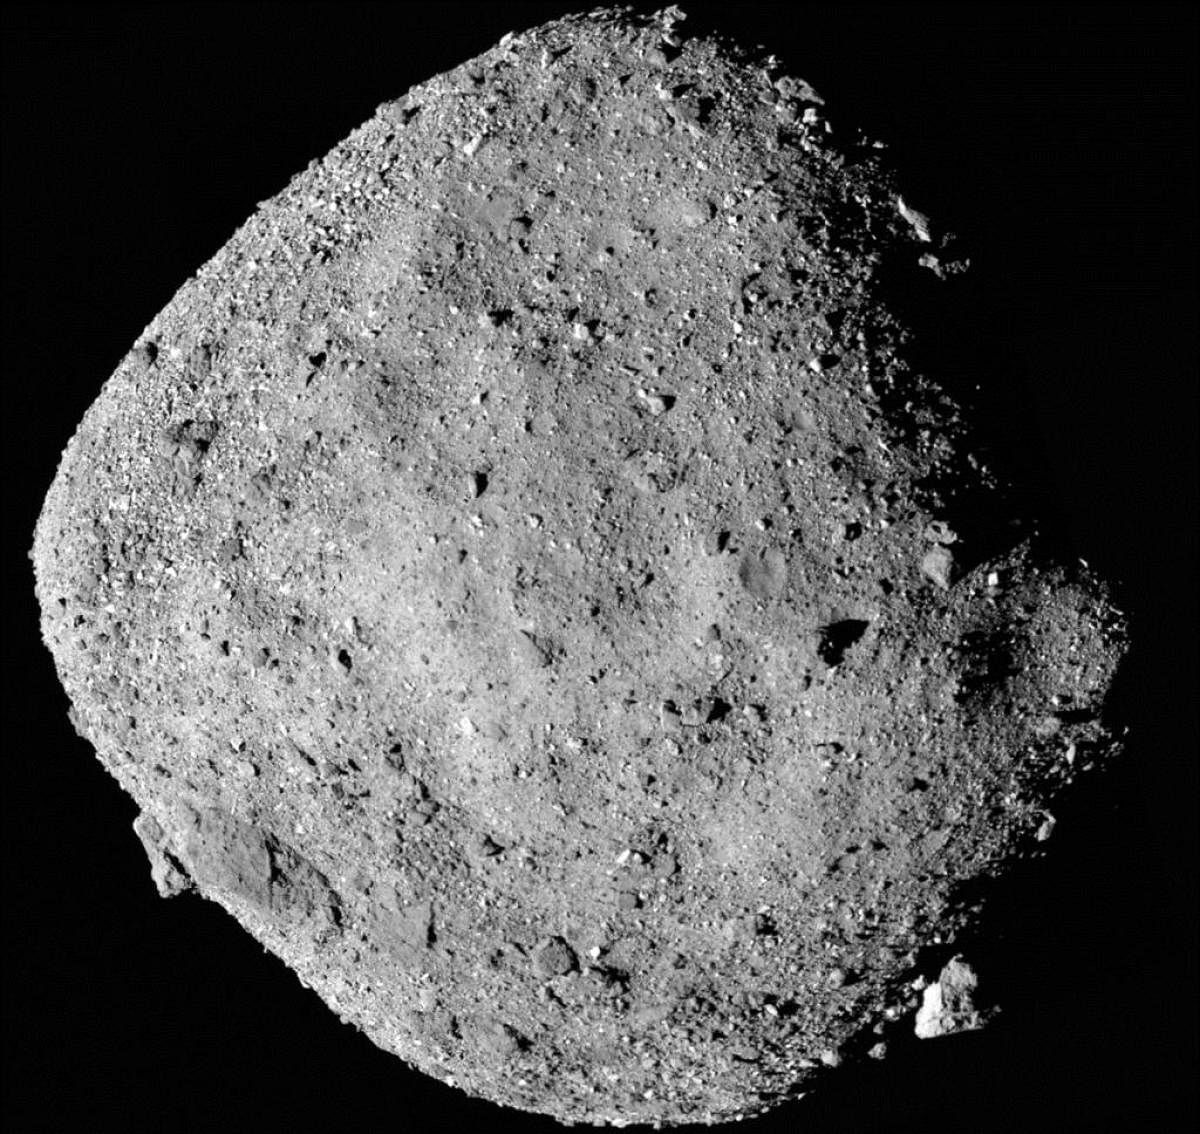 Bennu's diameter, rotation rate, inclination and overall shape presented almost exactly as projected. (Image courtesy NASA/Twitter)